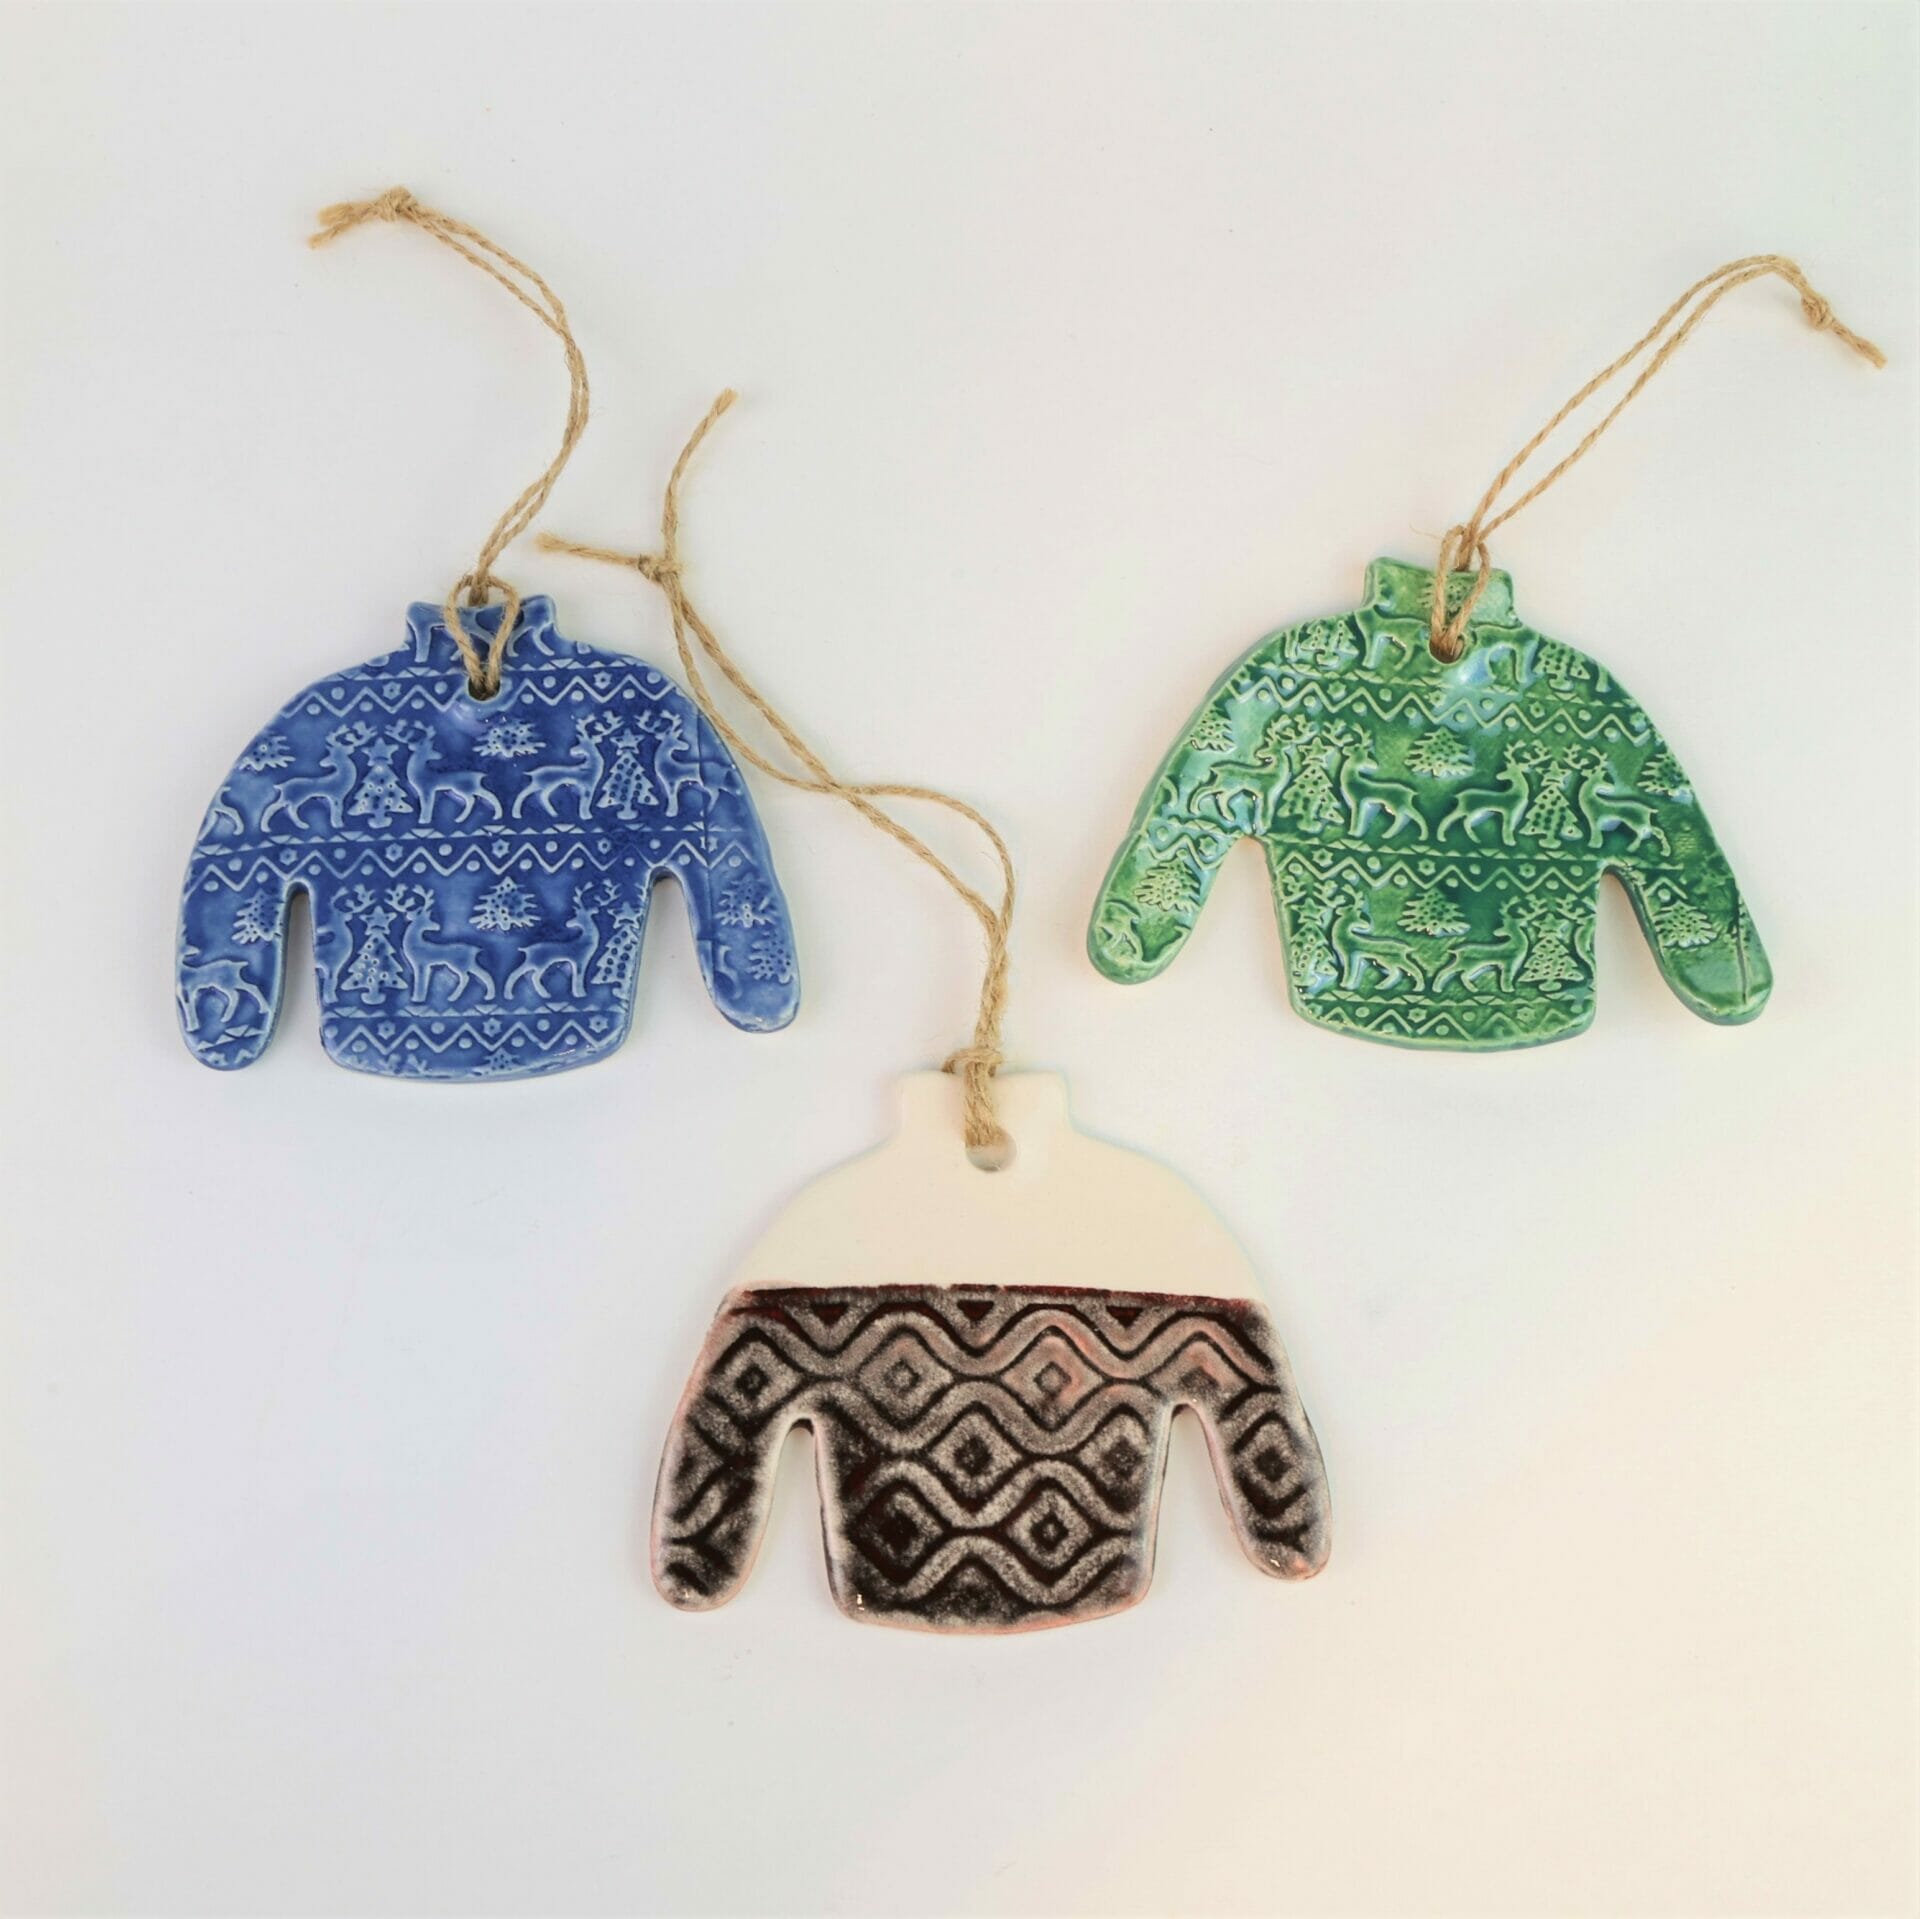 Three ugly sweater custom ornaments in various colors